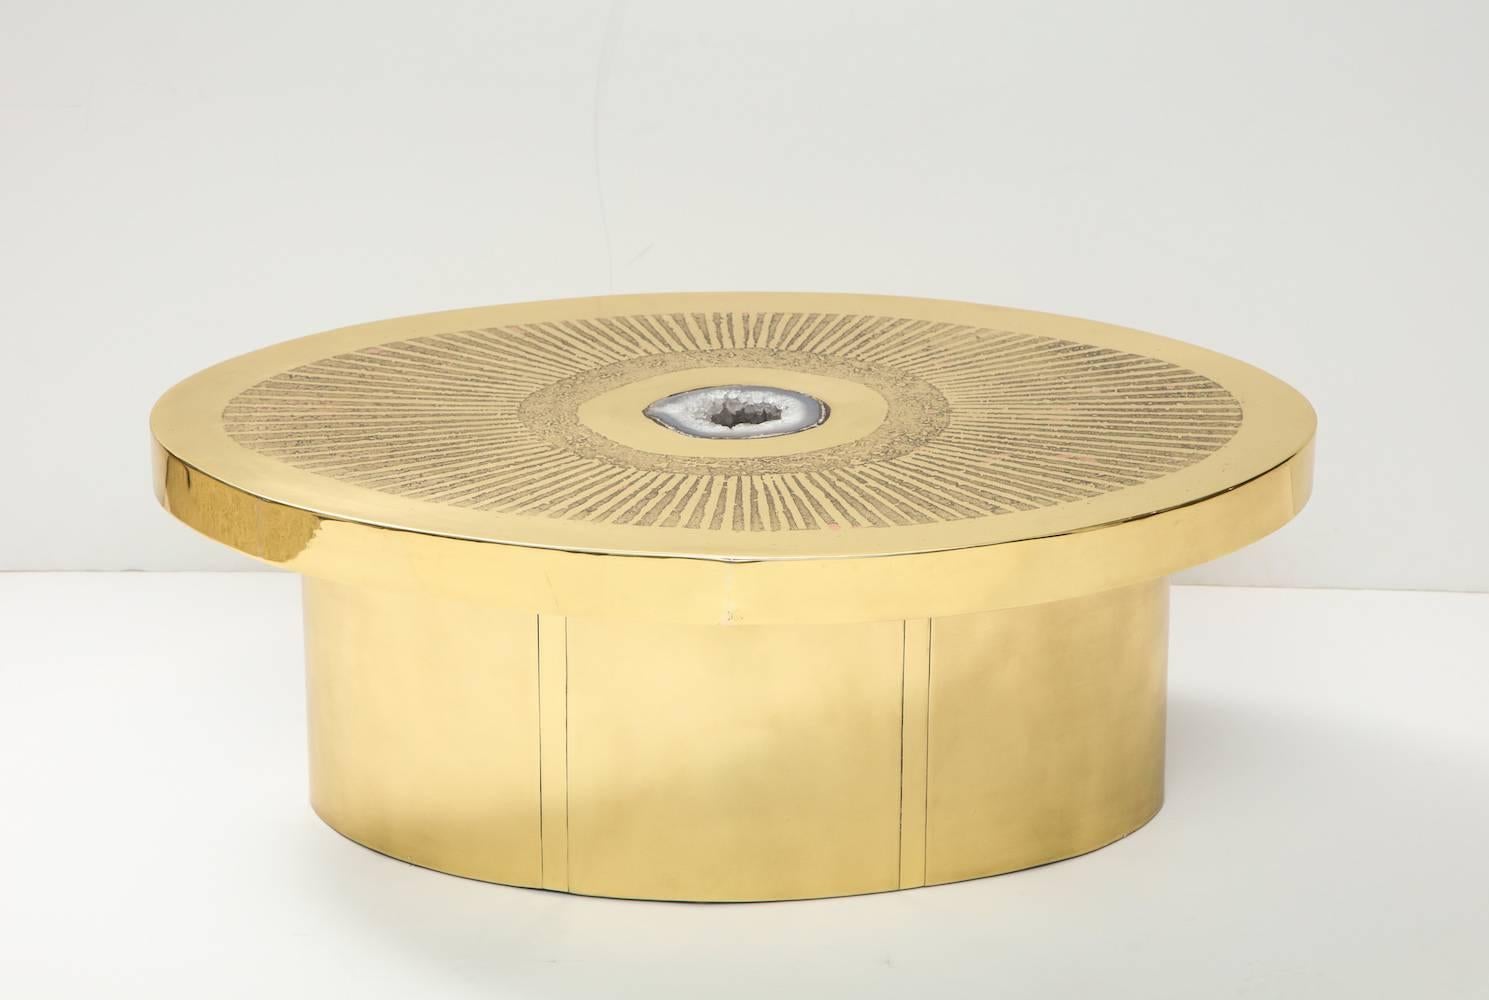 Unique cocktail table with inset Geode, by Arriau.
Studio-built ovoid form of polished brass with acid-etched surface pattern. Centre is inset with Geode of Agate creating a beautiful effect. This table in completely crafted by hand in France.